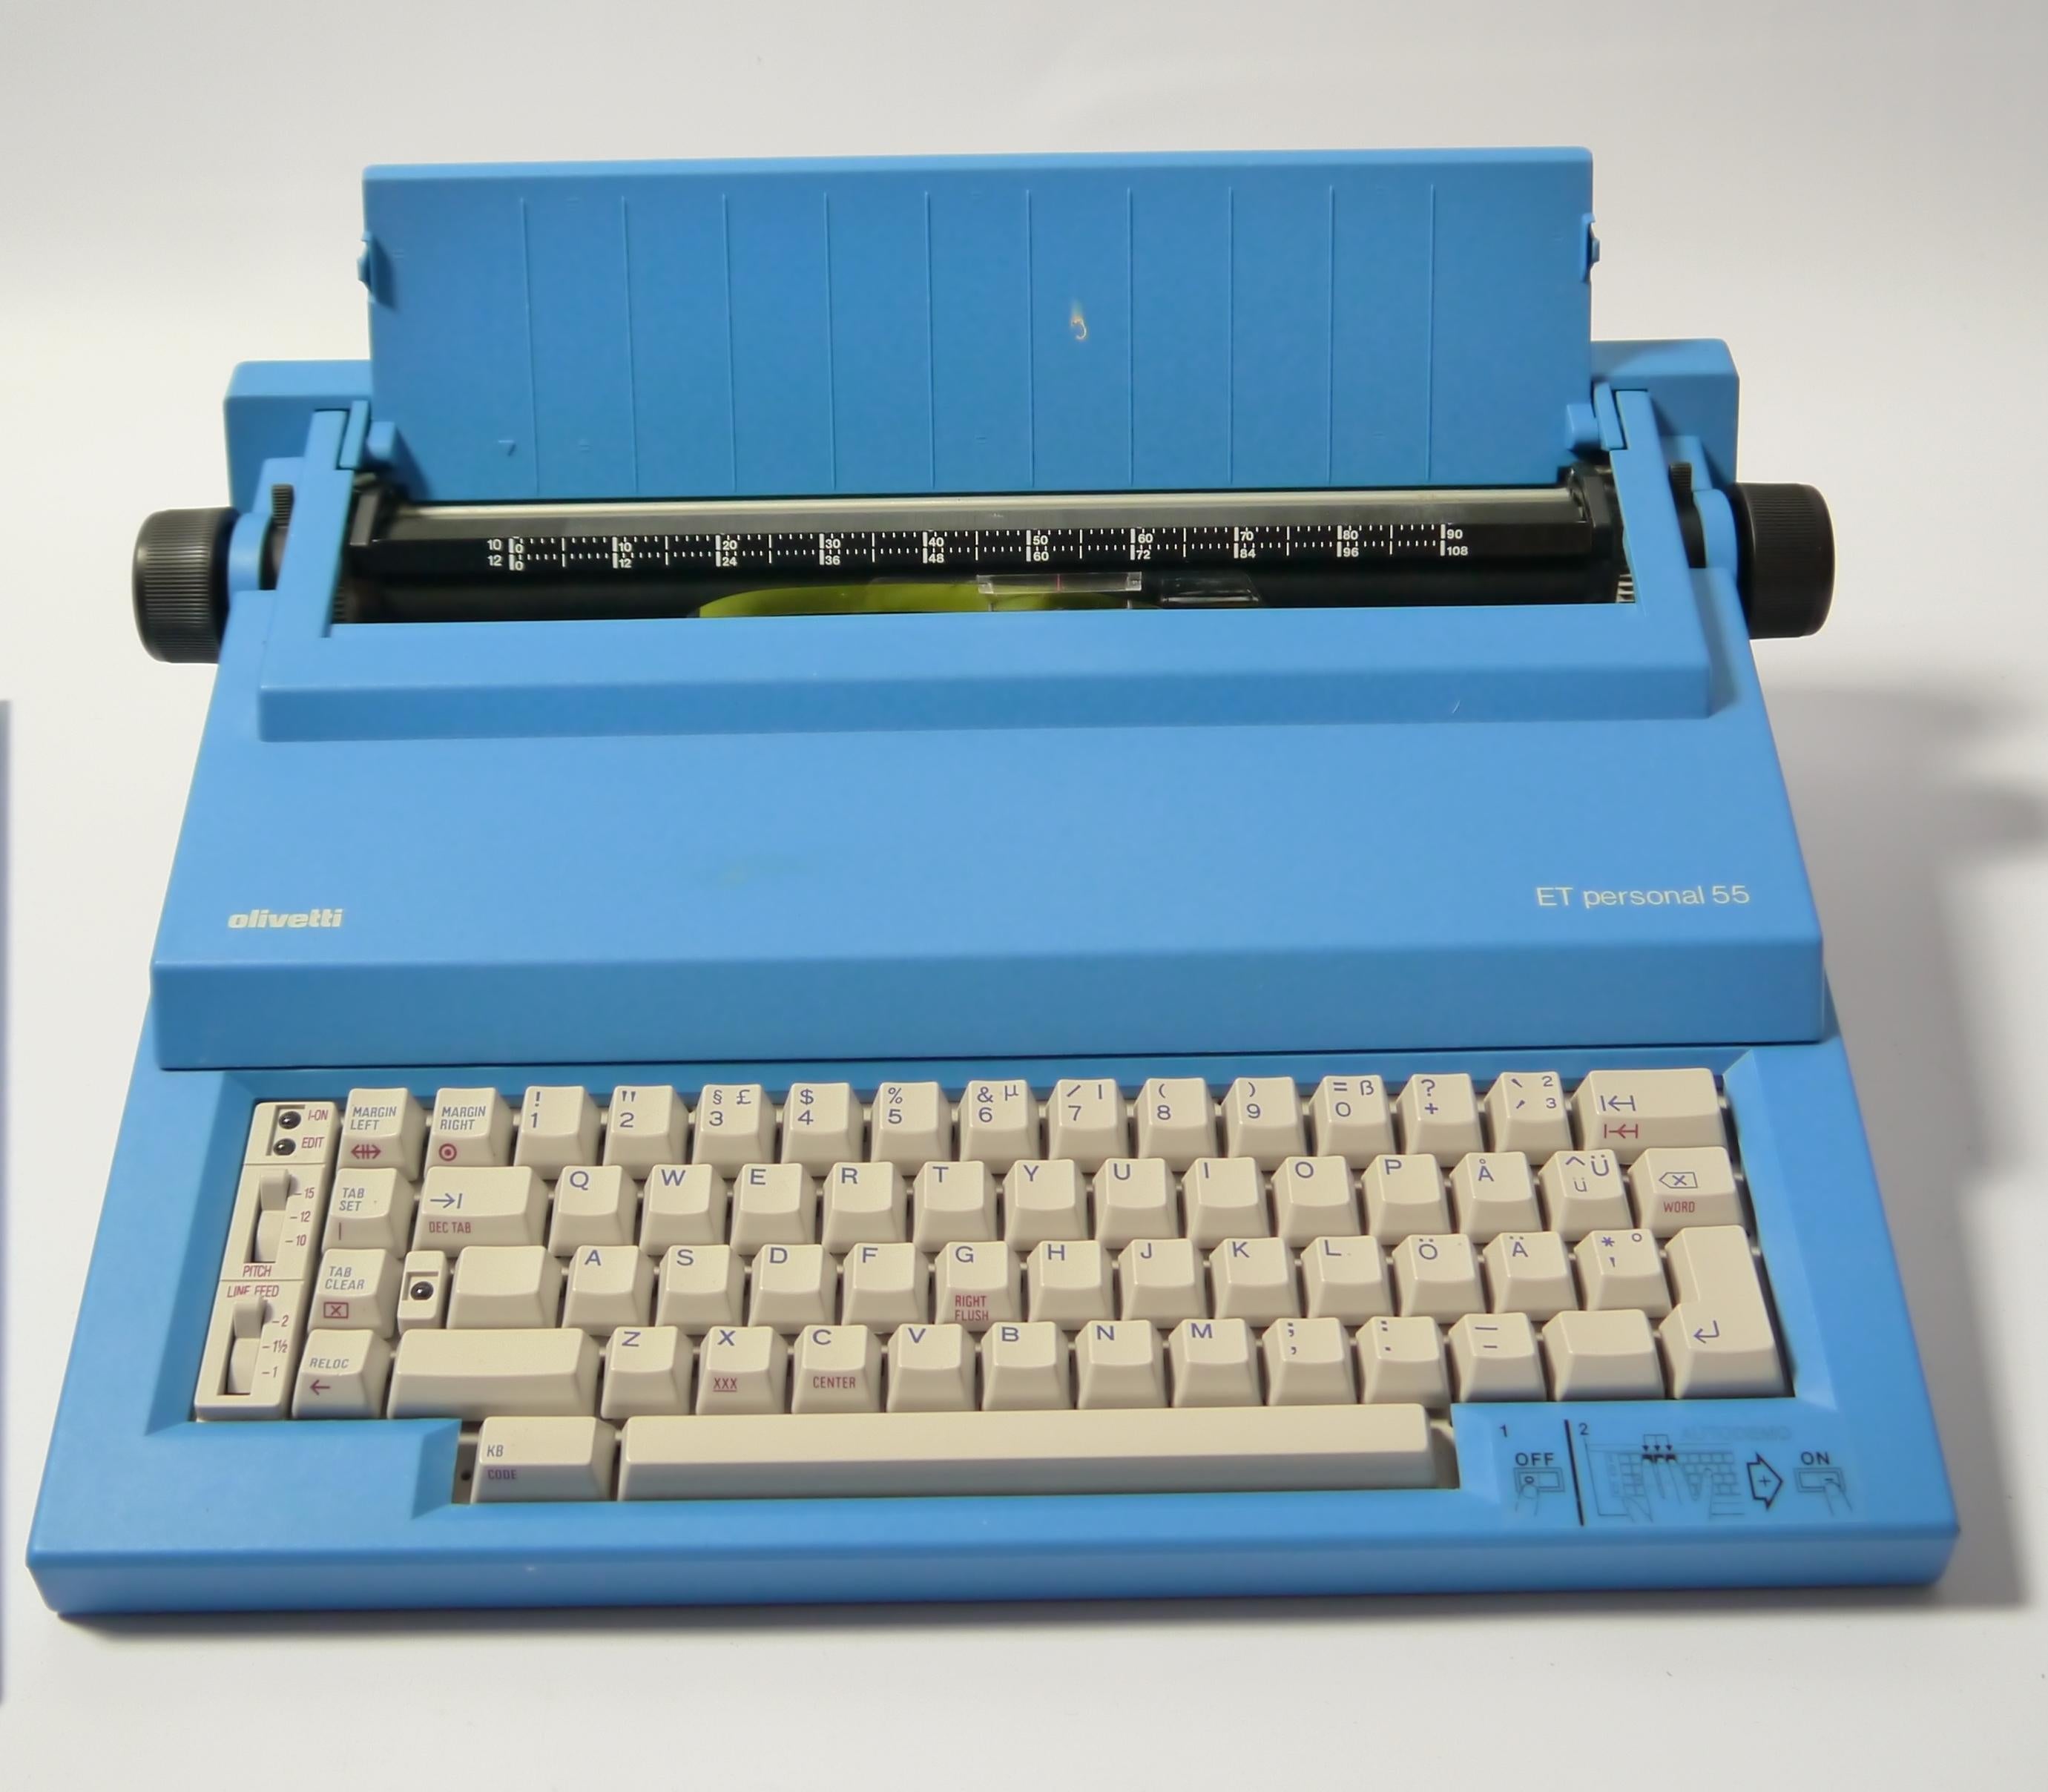 Portable electric typewriter model ET 55 designed by Mario Bellini in 1987, and produced by Olivetti. Typical 1980s Memphis influenced design and color. Complete and fully working (probably needs new ribbon) and comes with original box. The ET 55 is